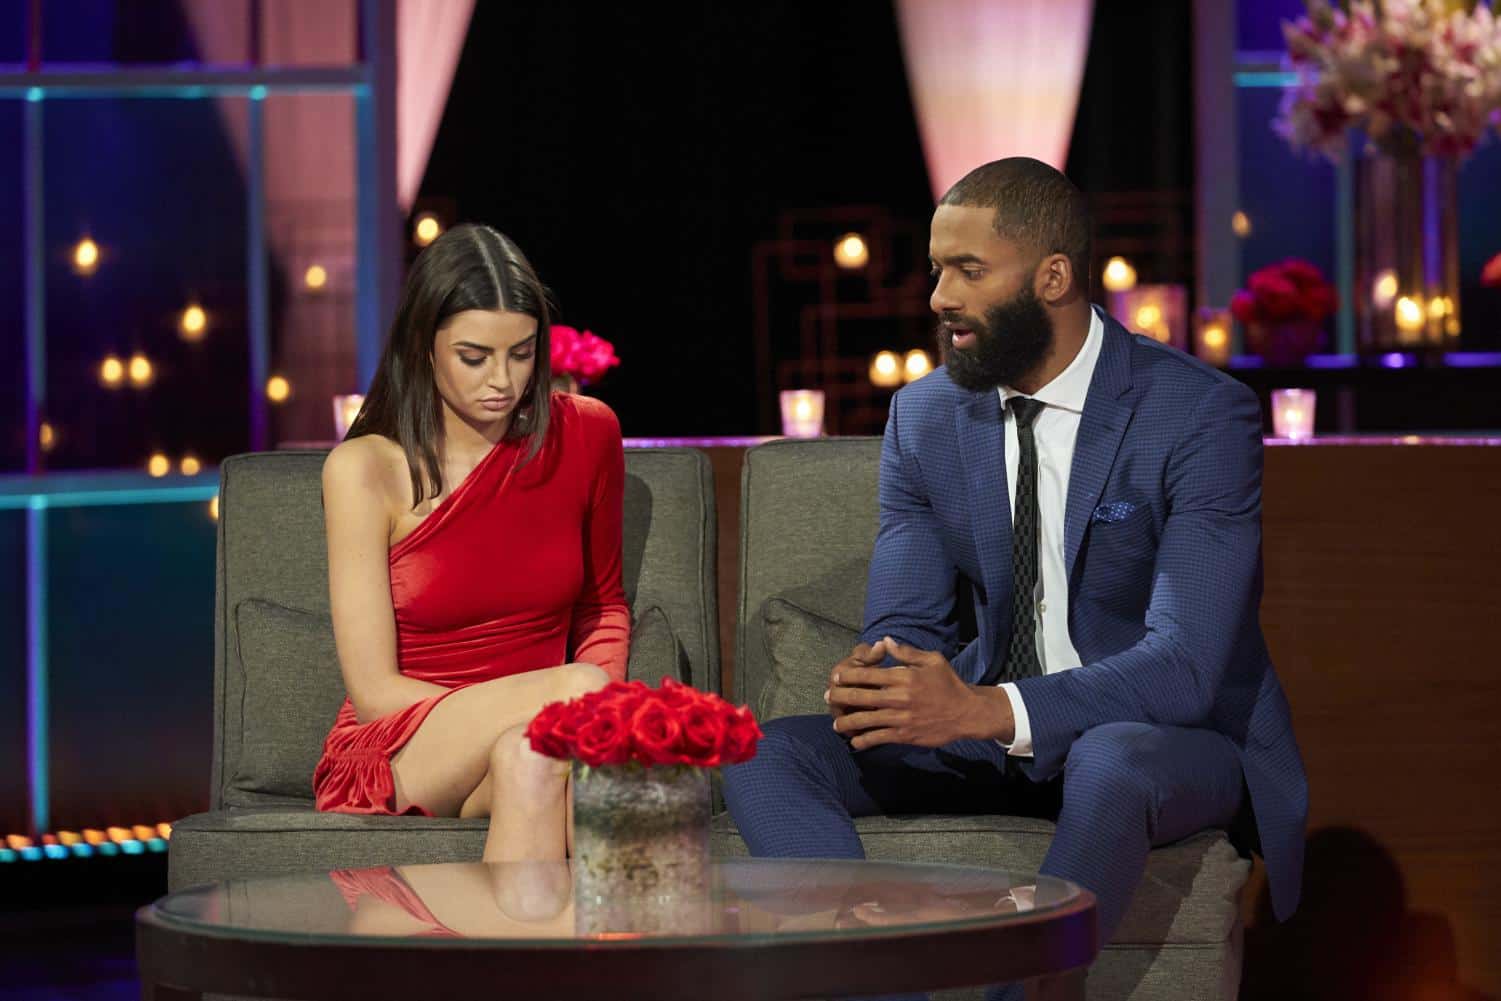 Sydney Hightower Reveals How 'The Bachelor' Brought Her & Her